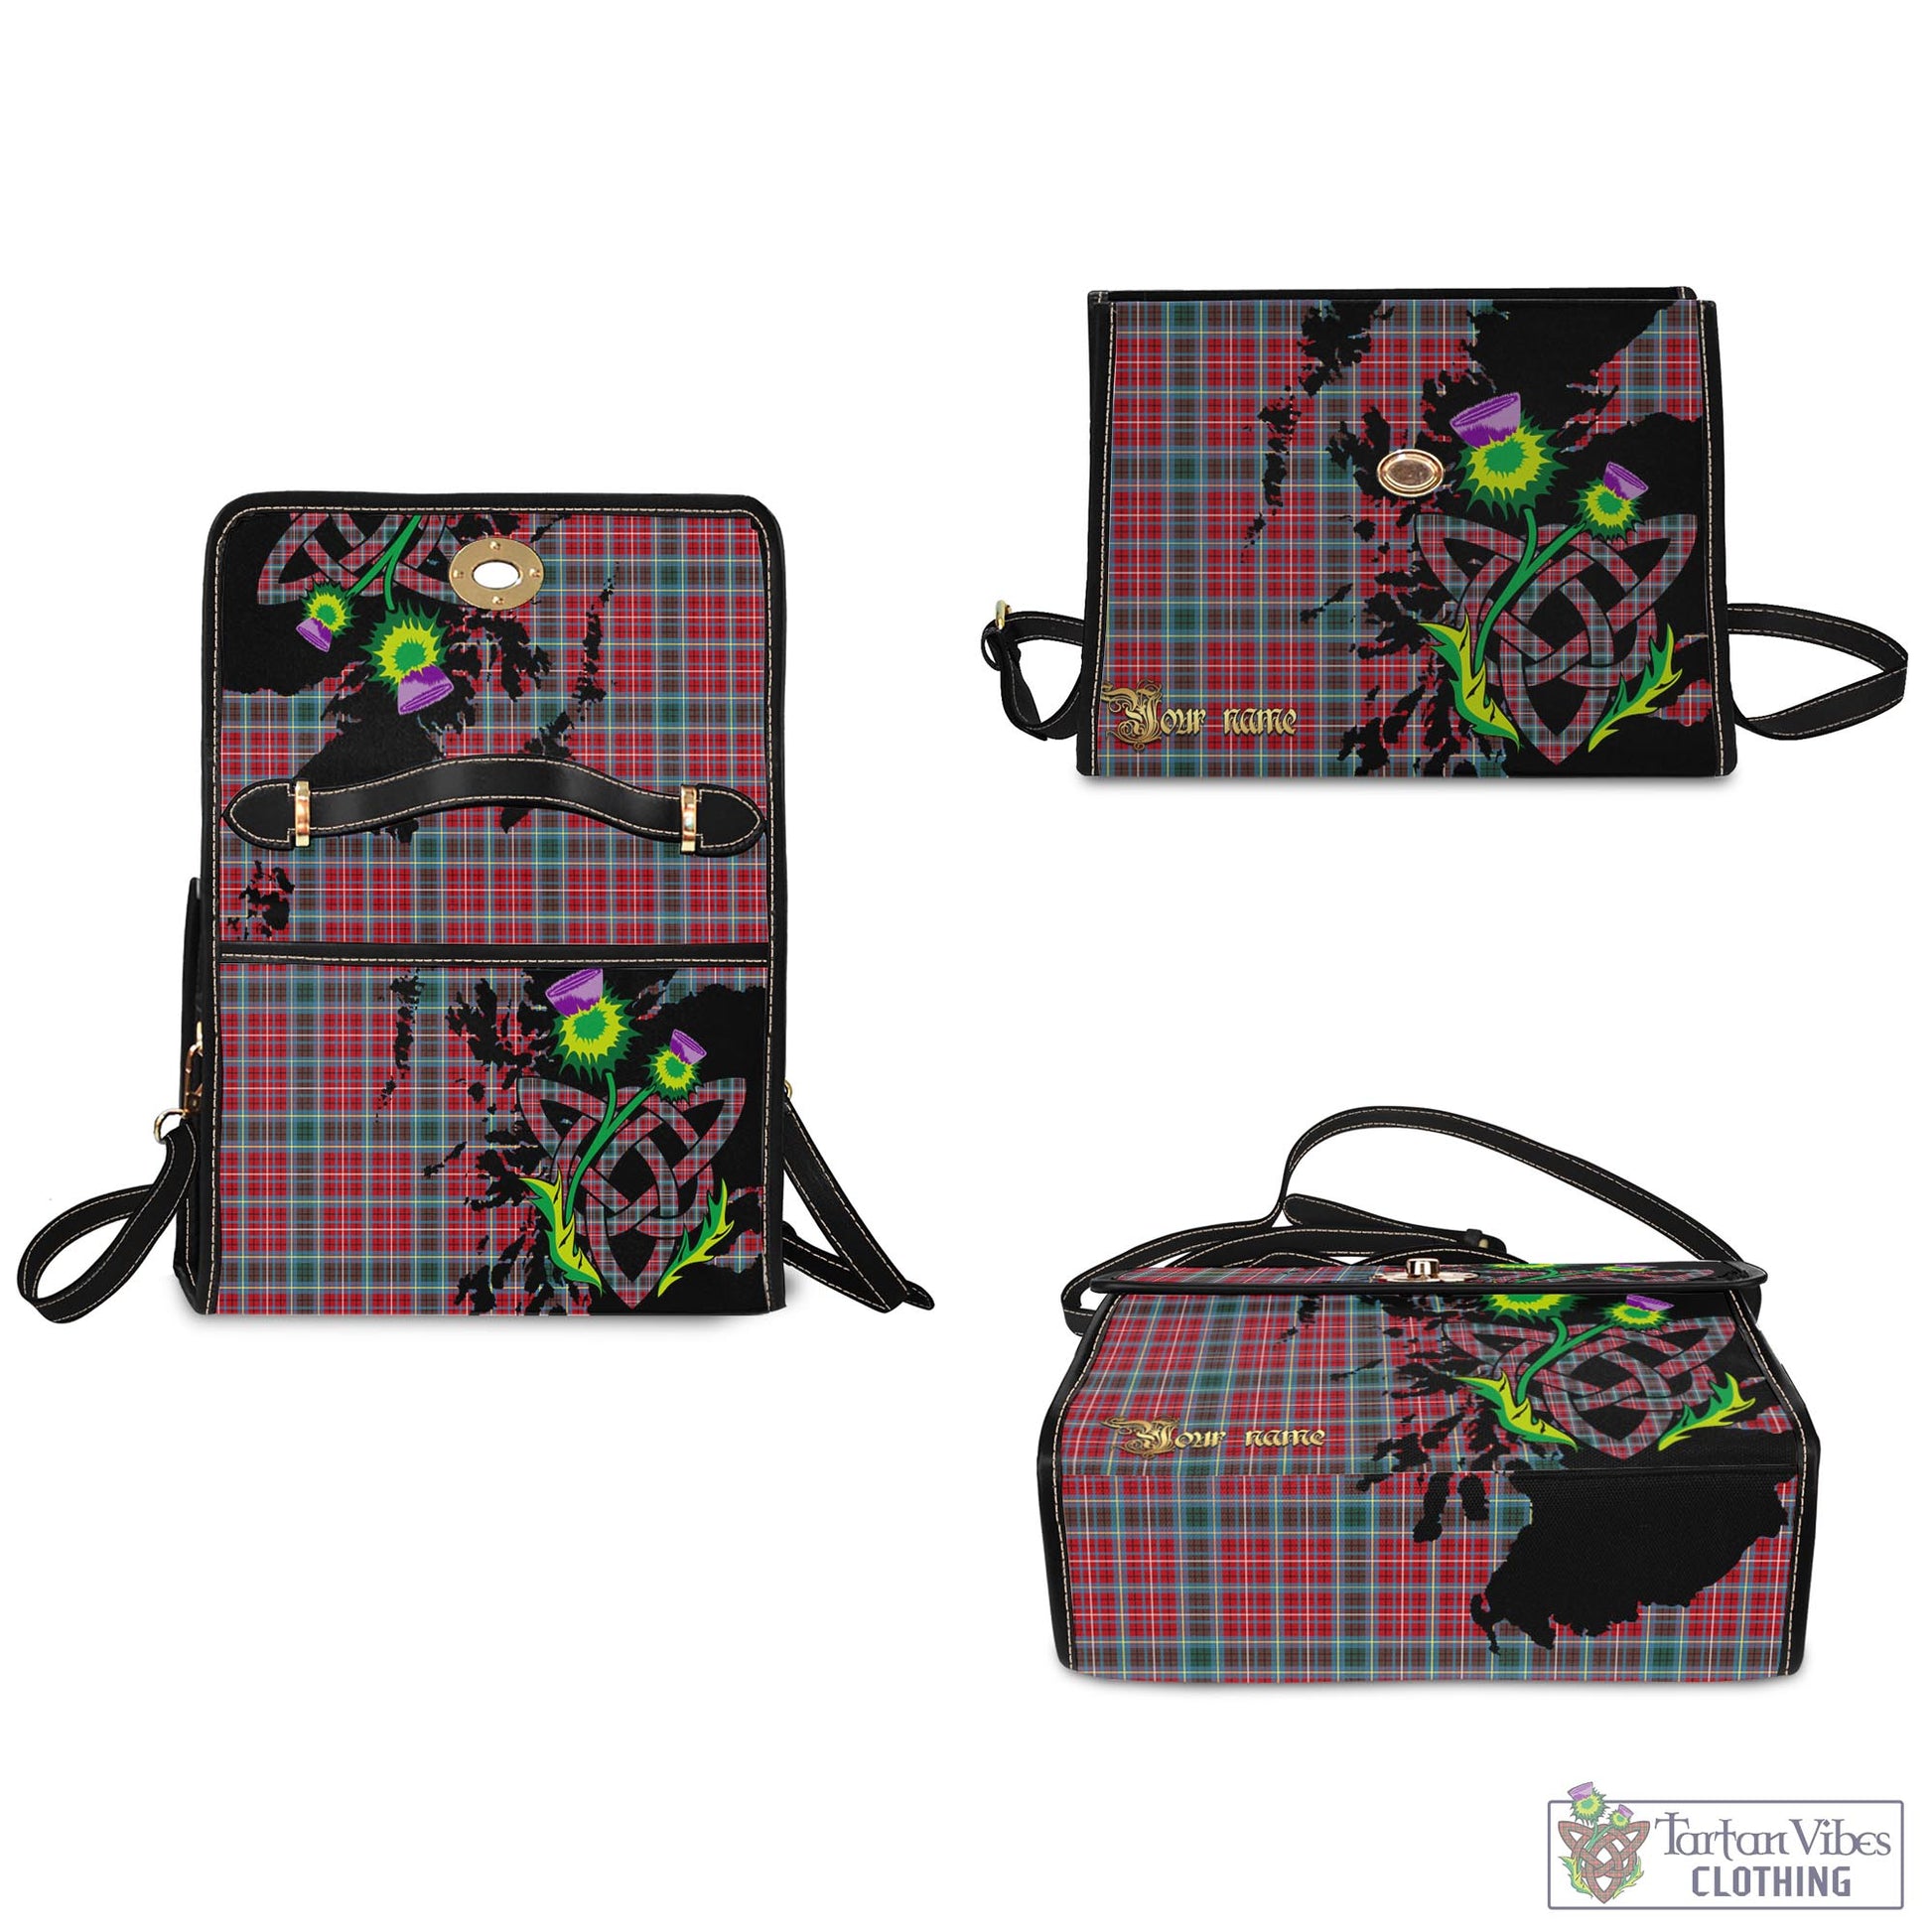 Tartan Vibes Clothing British Columbia Province Canada Tartan Waterproof Canvas Bag with Scotland Map and Thistle Celtic Accents